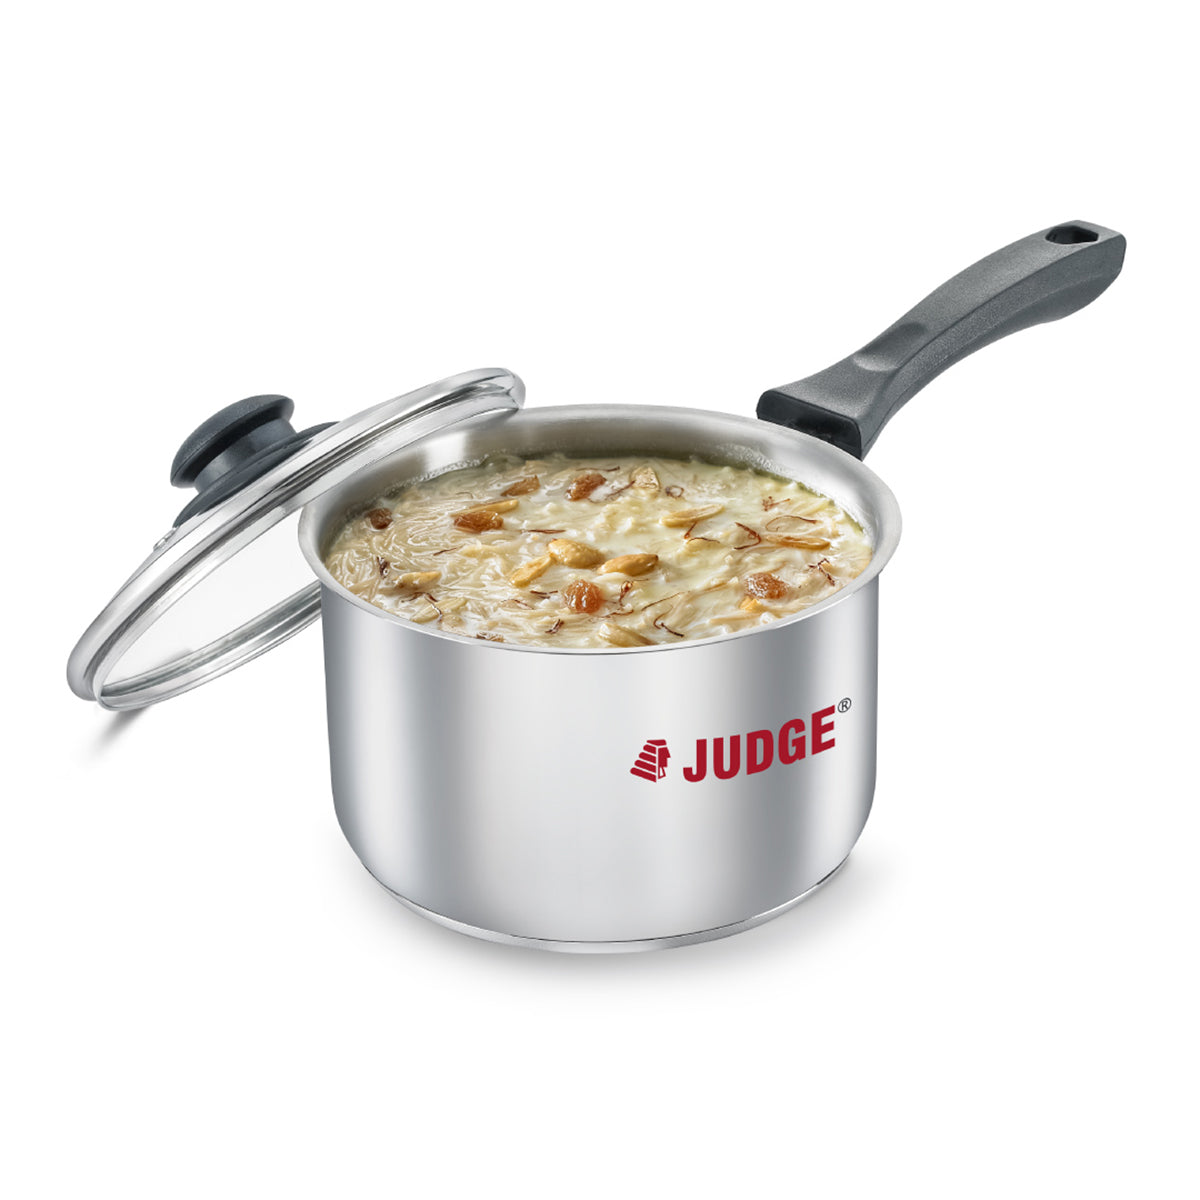 Judge by Prestige Stainless Steel Sauce Pan with Glass Lid